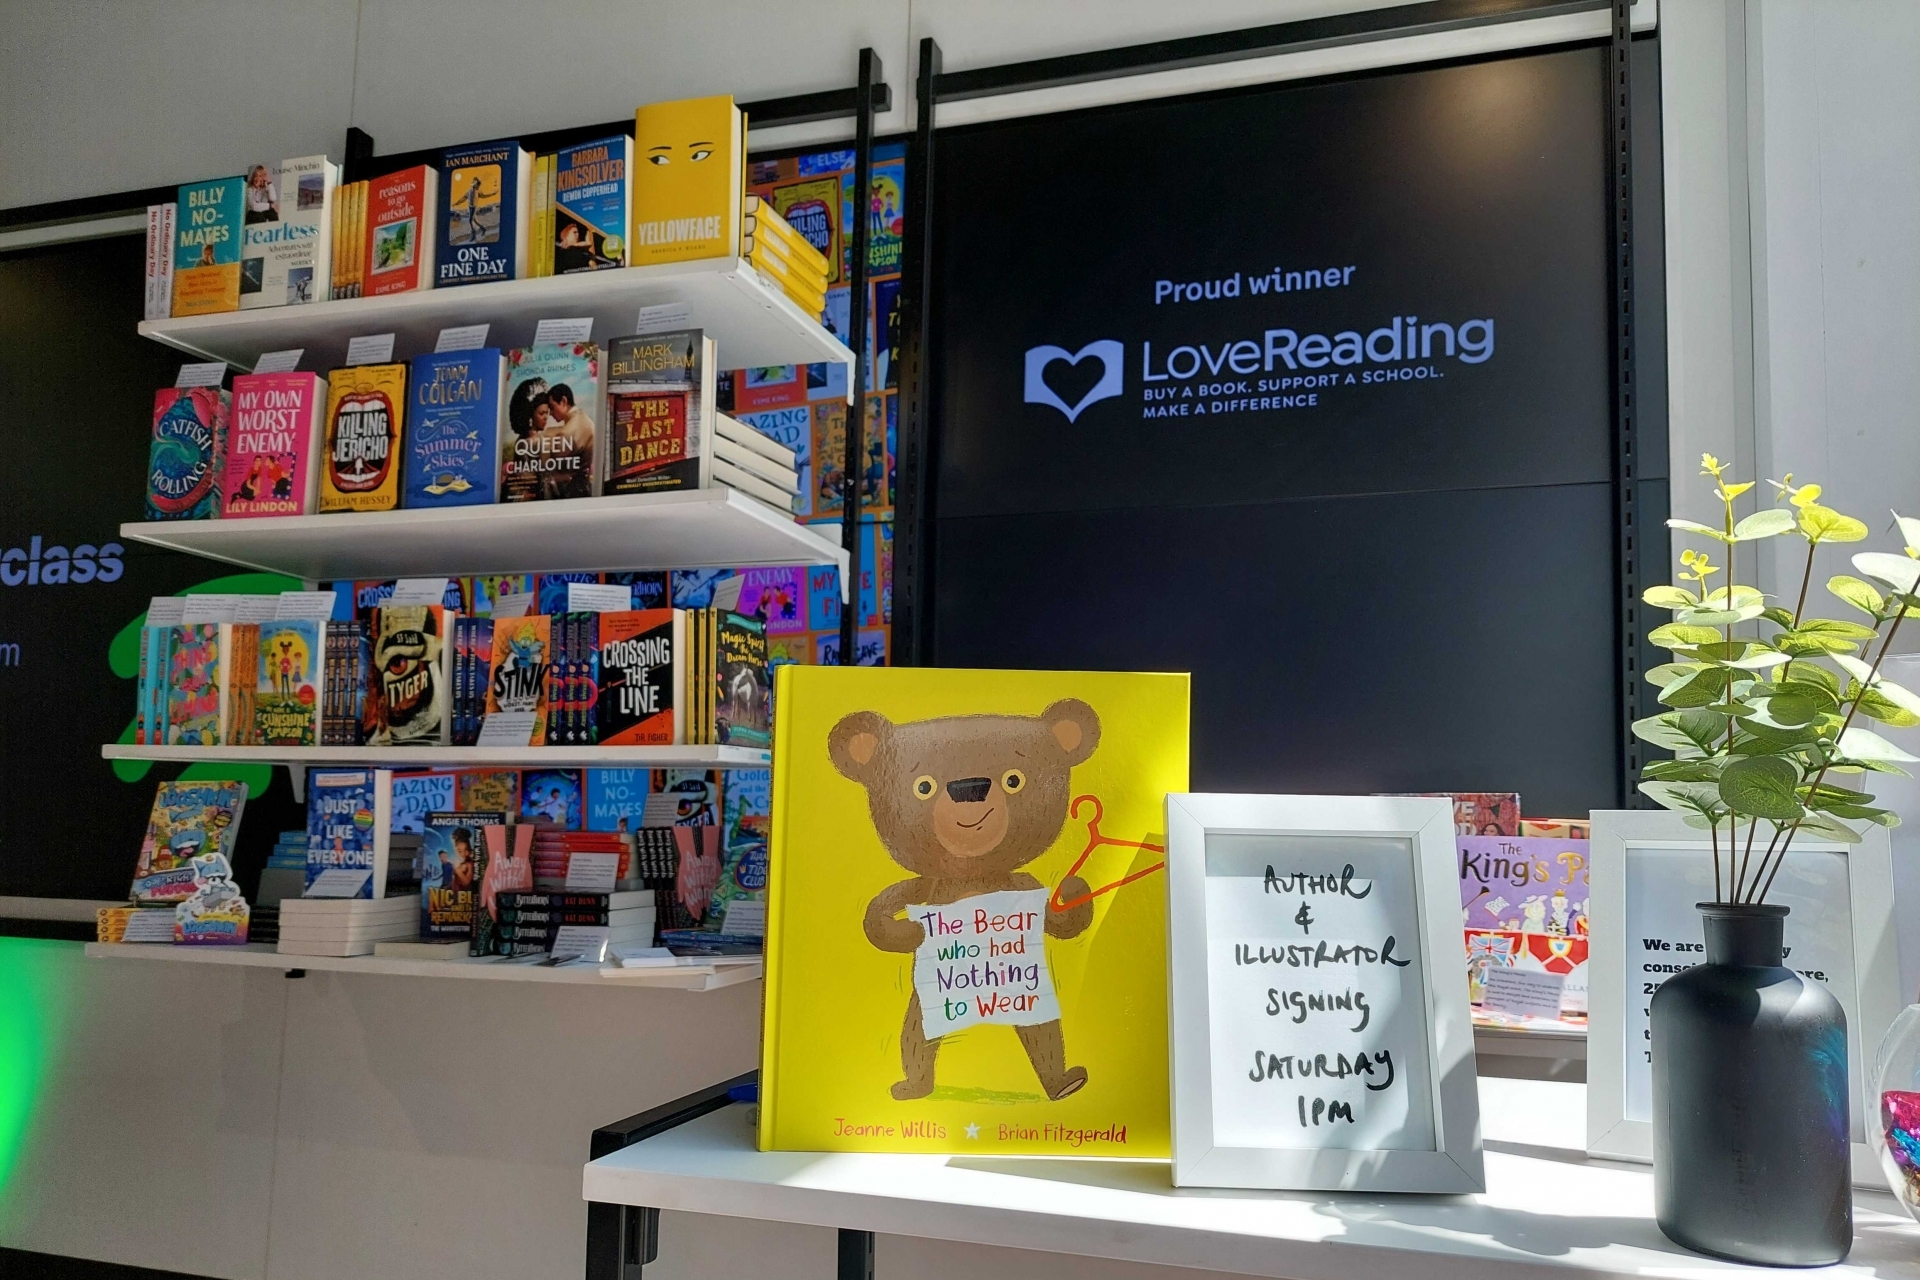 LoveReading wins the Small Business x Sage pop-up shop competition!